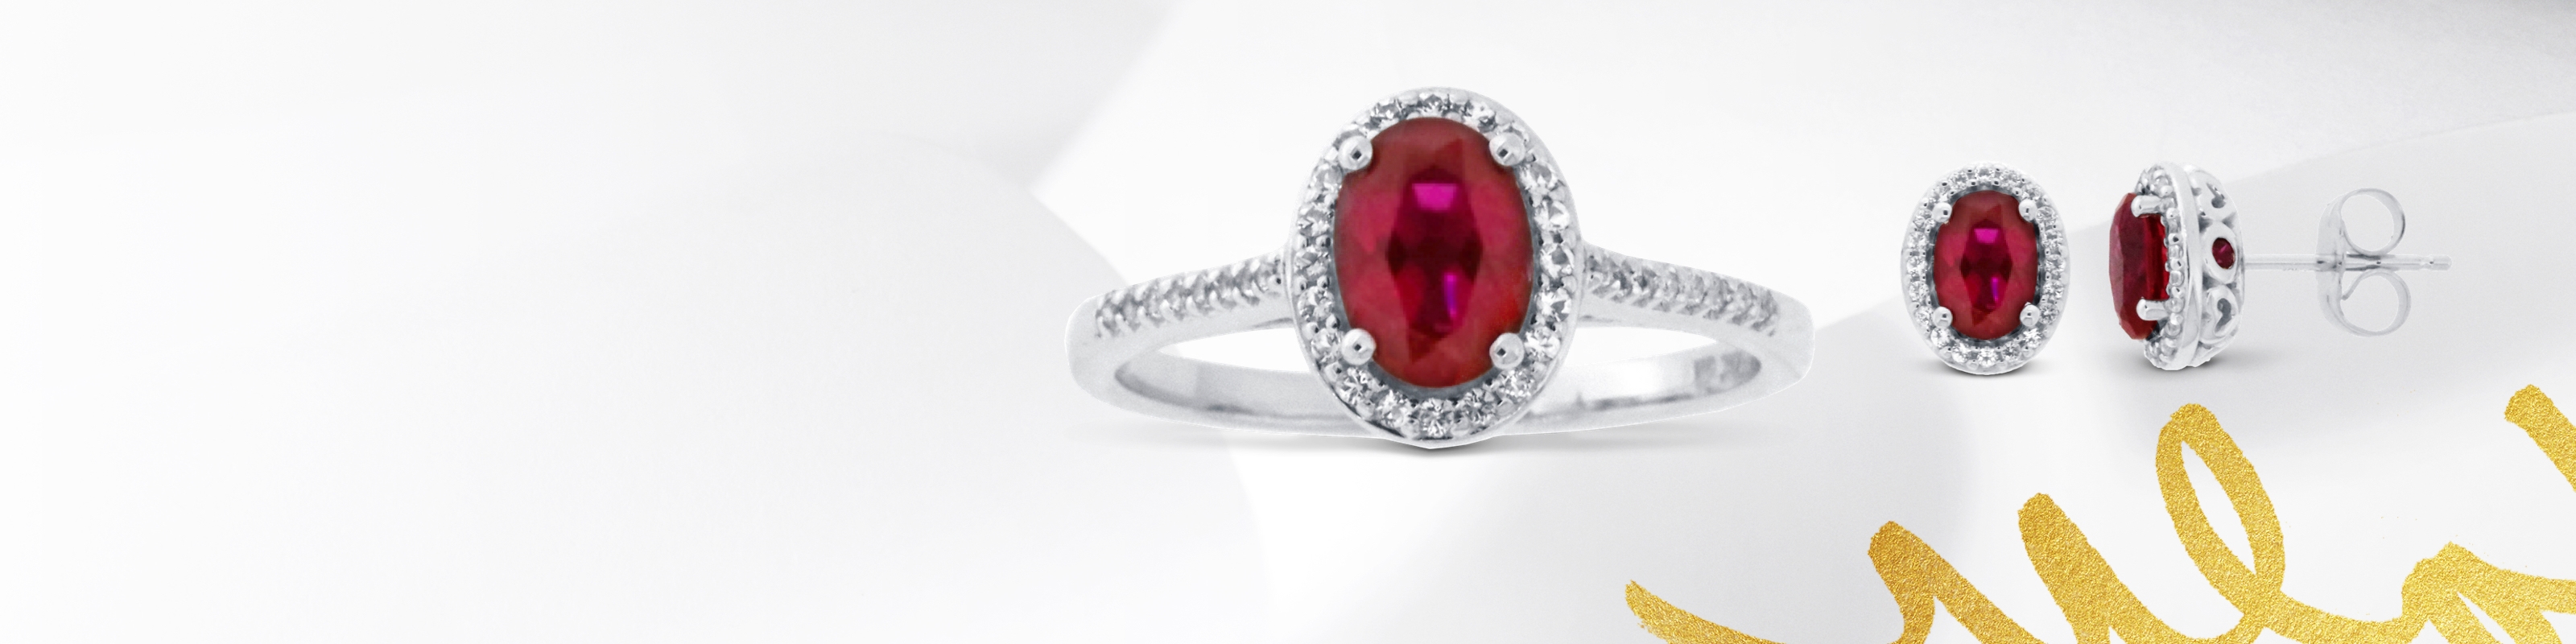 Ruby ring and earrings set in white gold with white topaz stones. Shop all ruby jewelry at Jared.